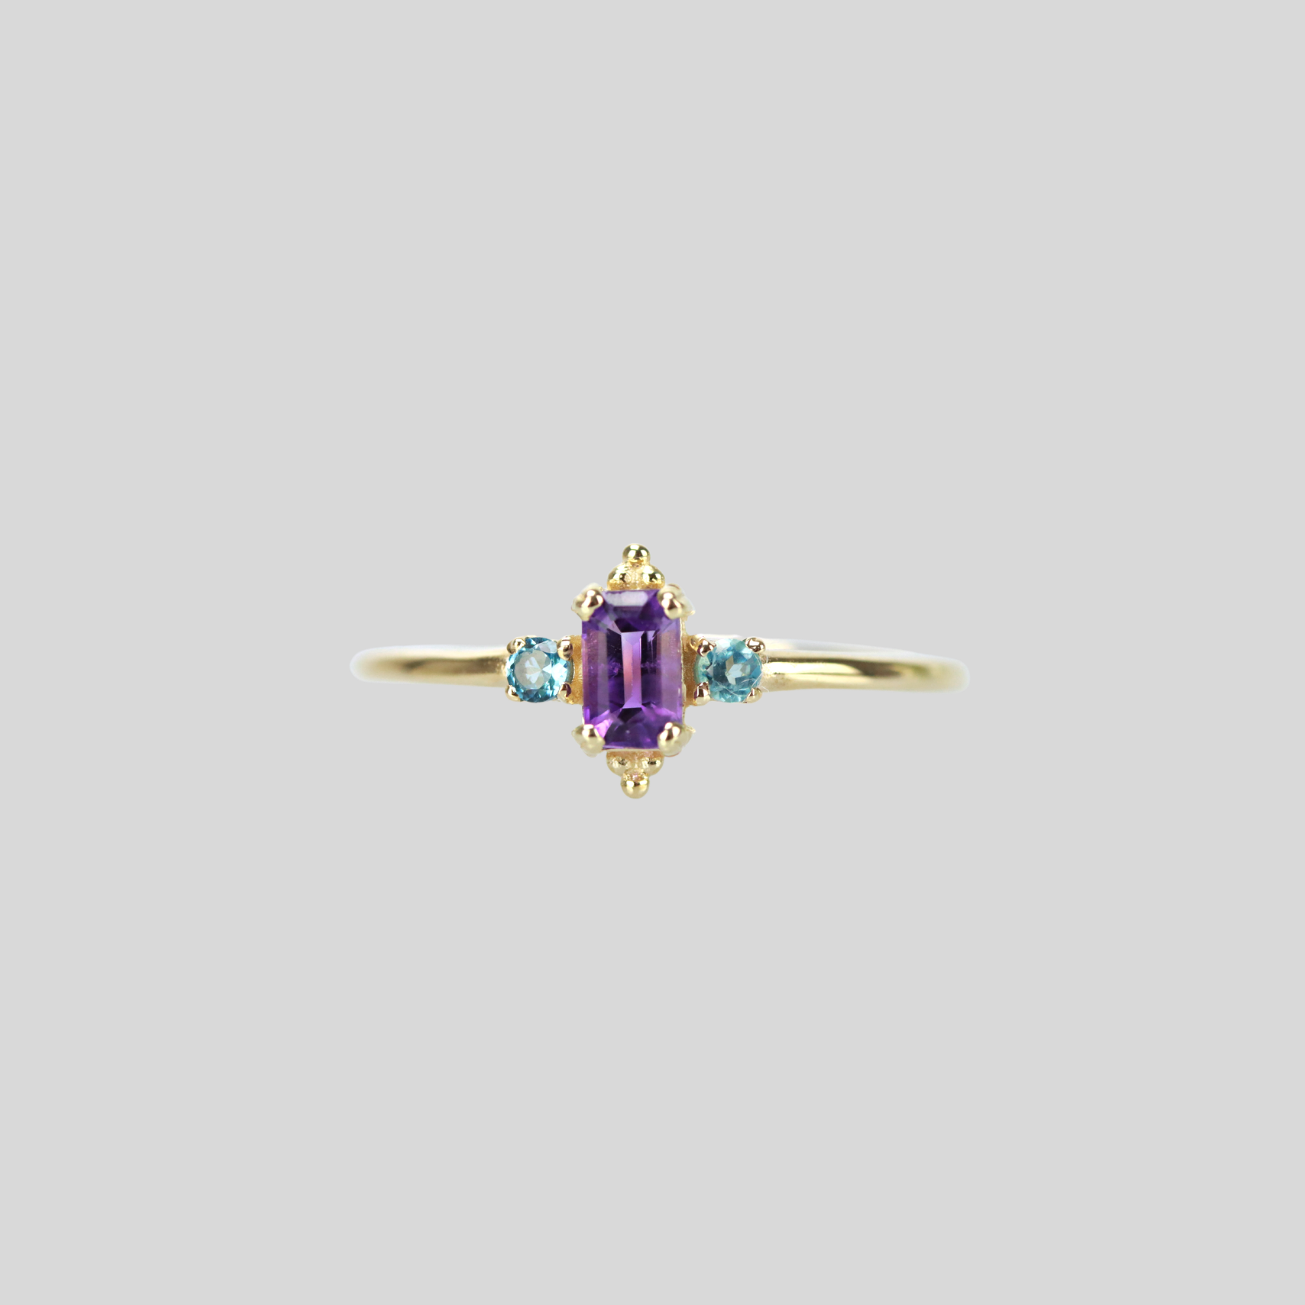 Solid 14k gold emerald cut amethyst and blue topaz ring